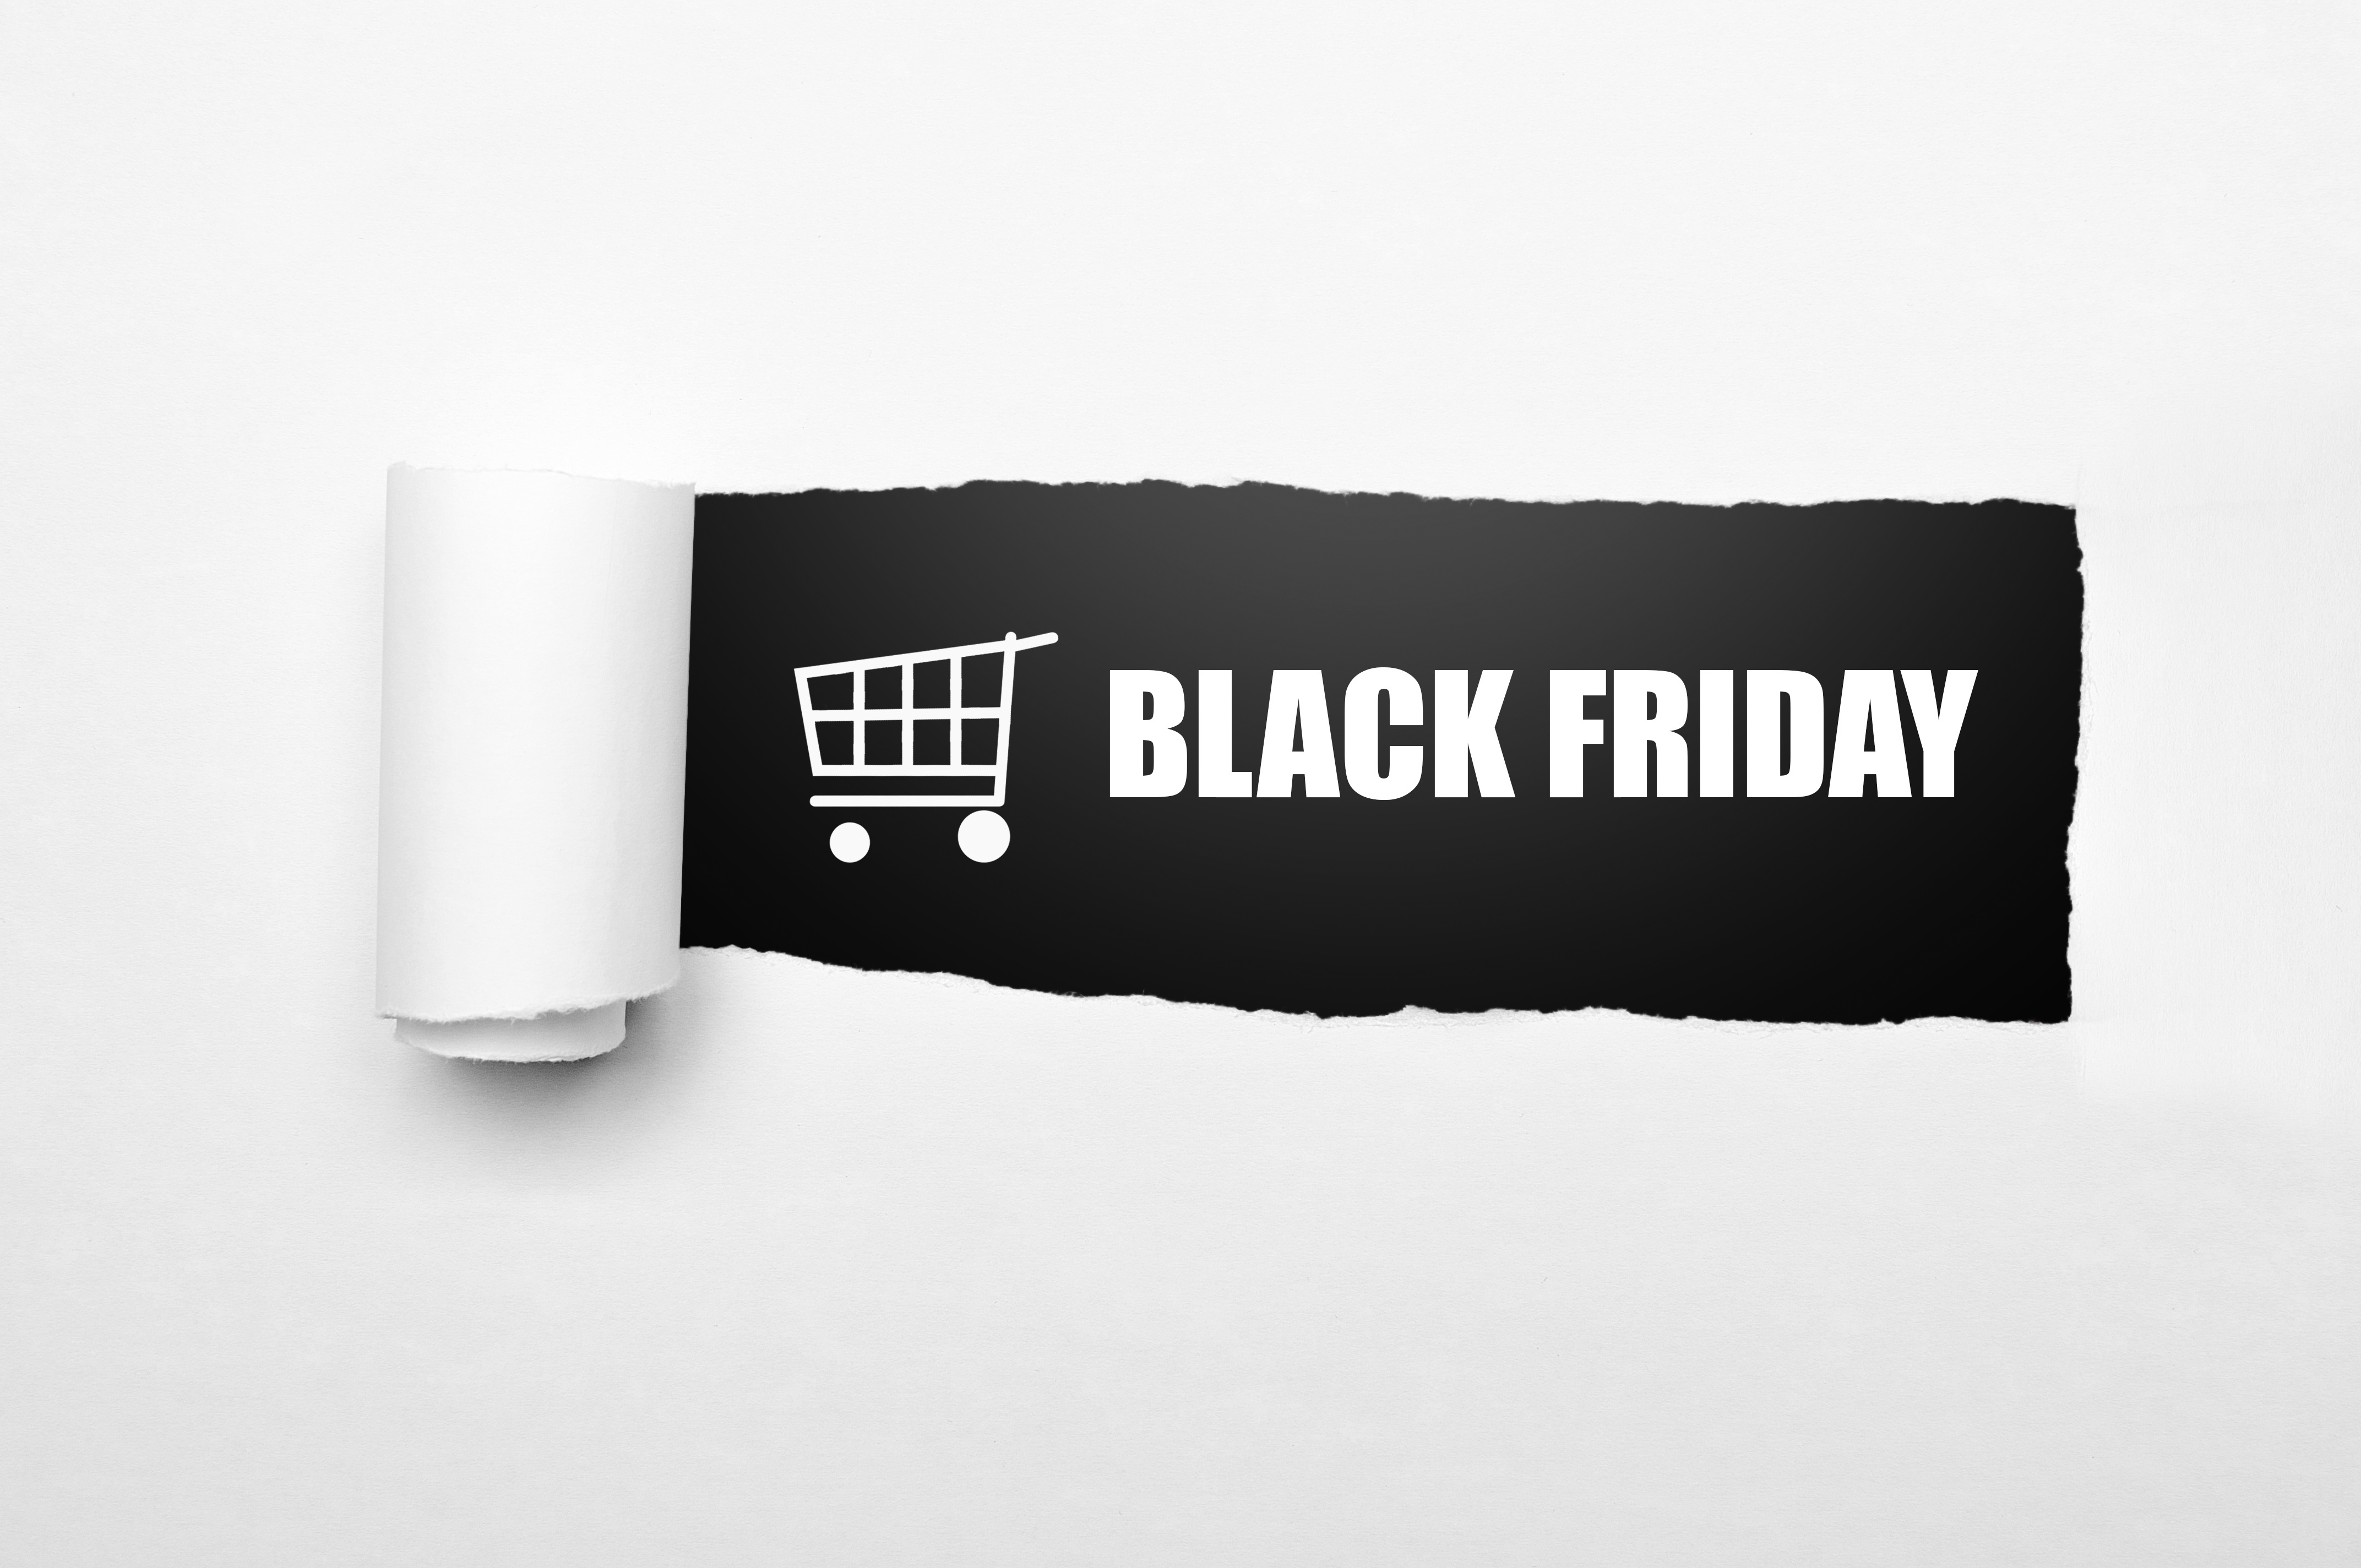 Surviving Black Friday: Why Avoiding Outages Is No Longer Enough